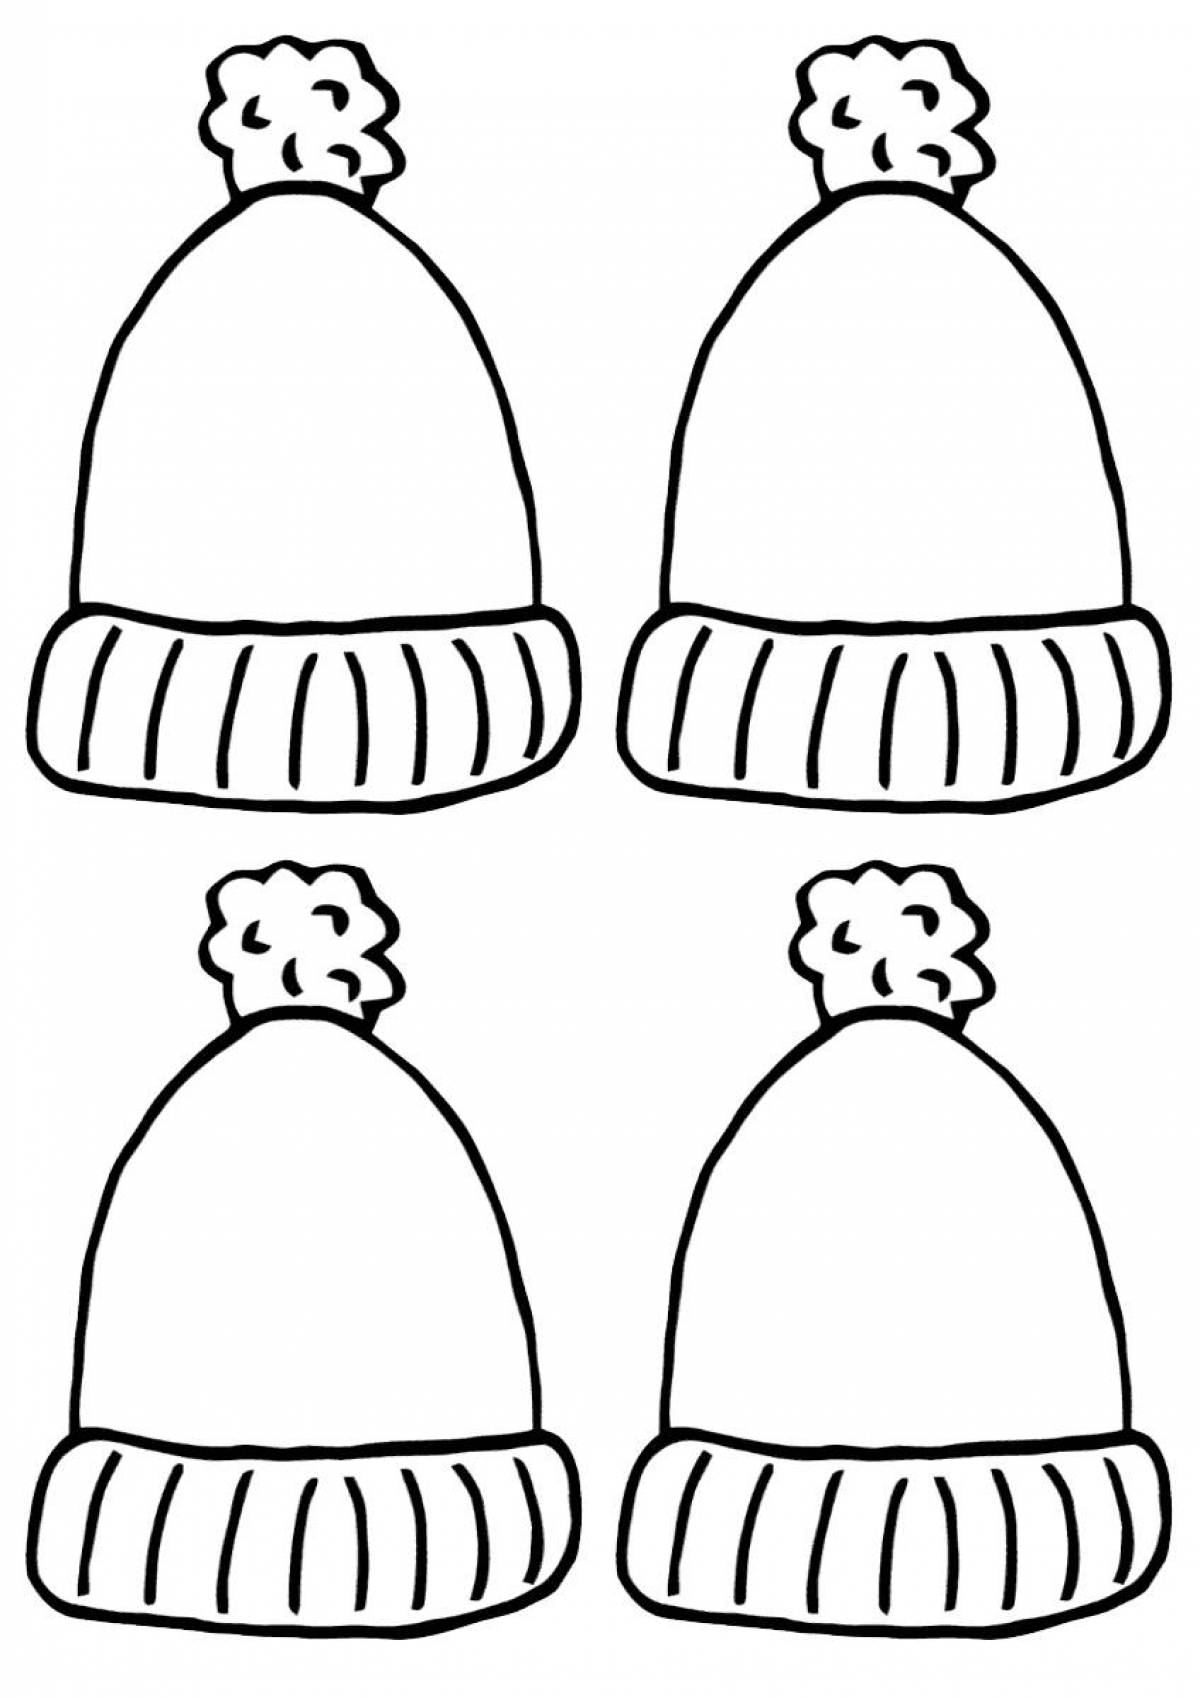 Coloring hat for kids